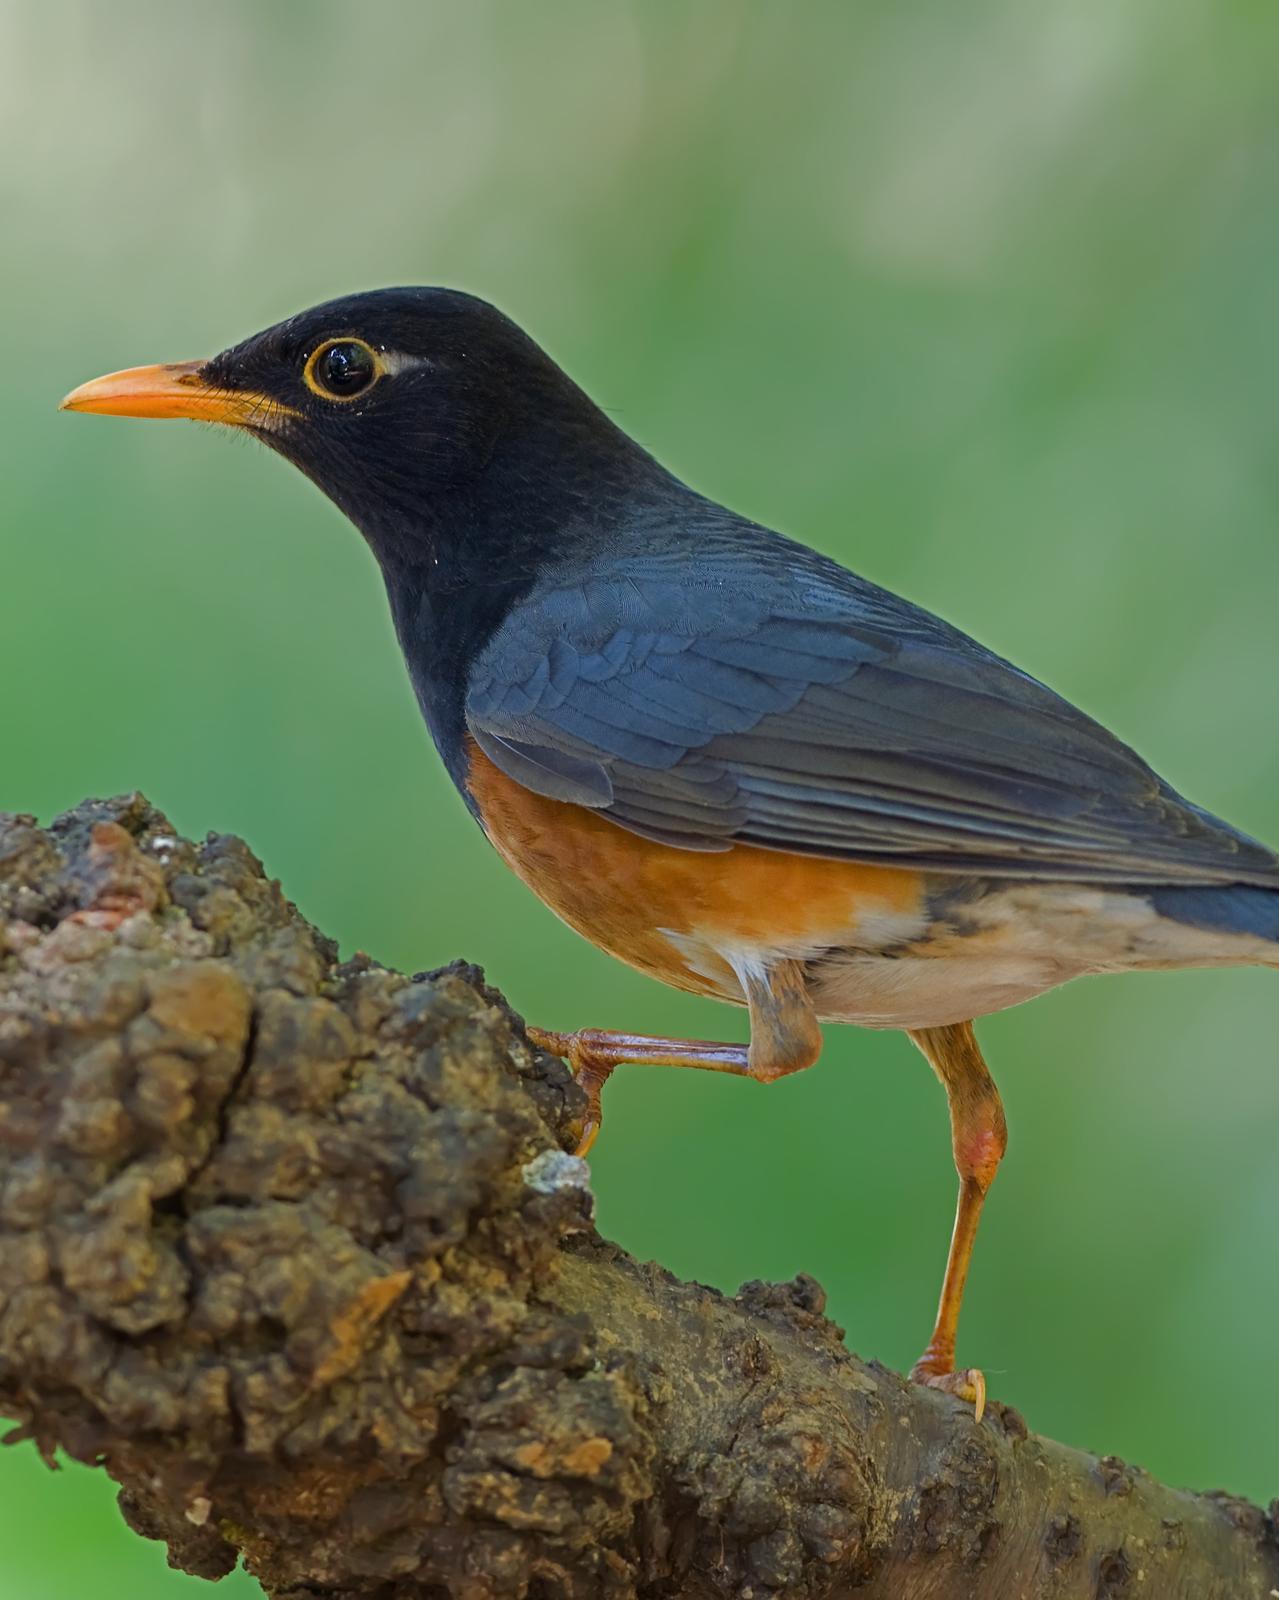 Black-breasted Thrush Photo by Alex Vargas